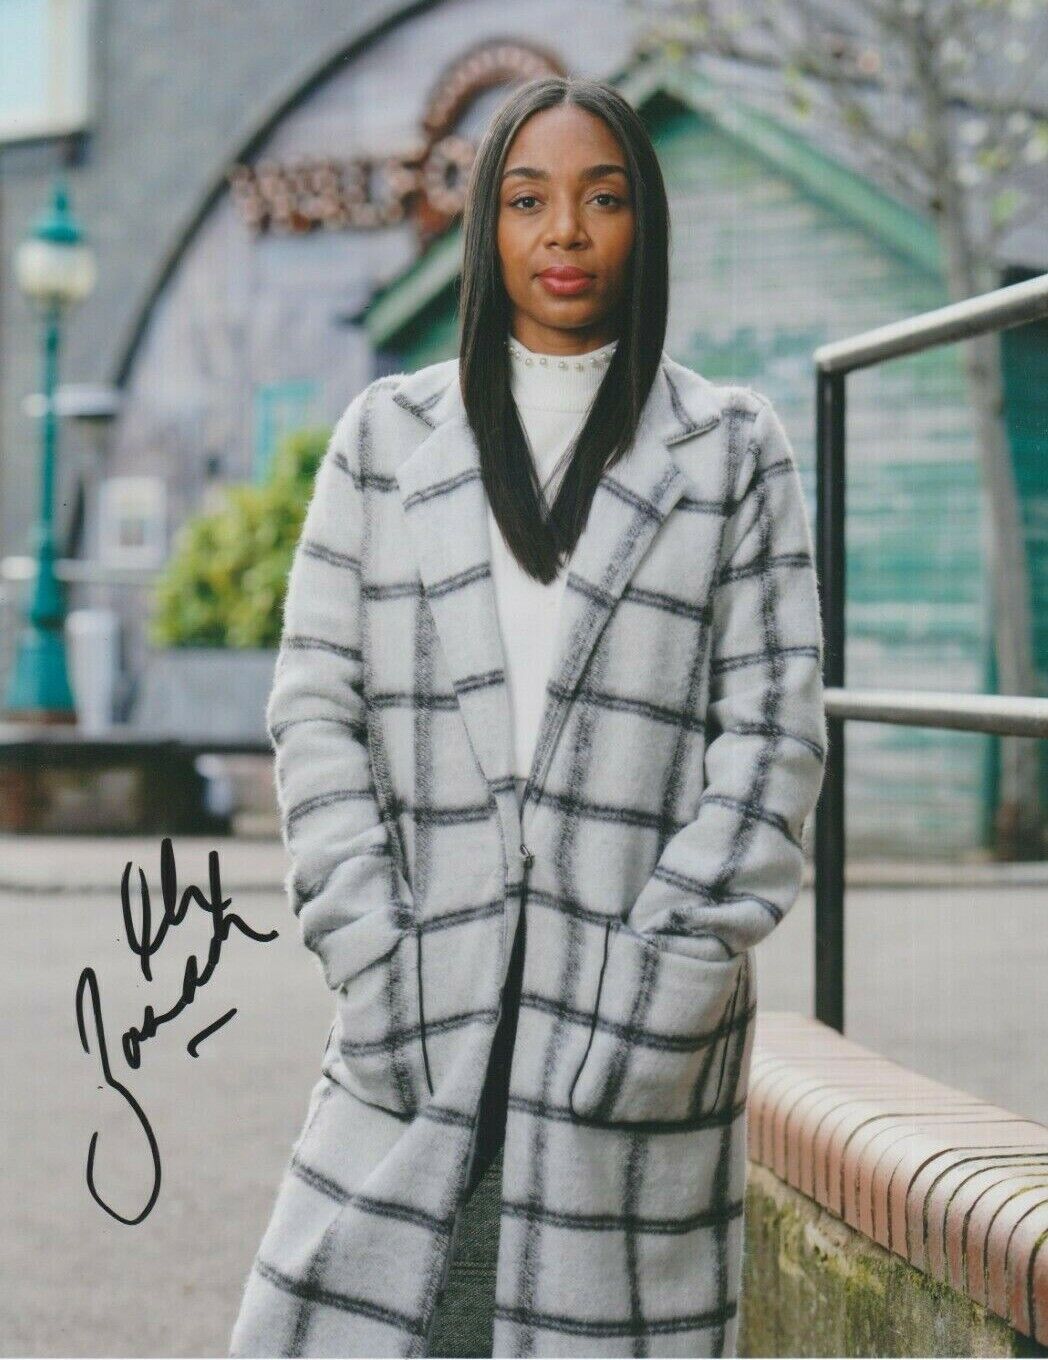 Zaraah Abrahams **HAND SIGNED** 10x8 Photo Poster painting ~ Eastenders (Chelsea)